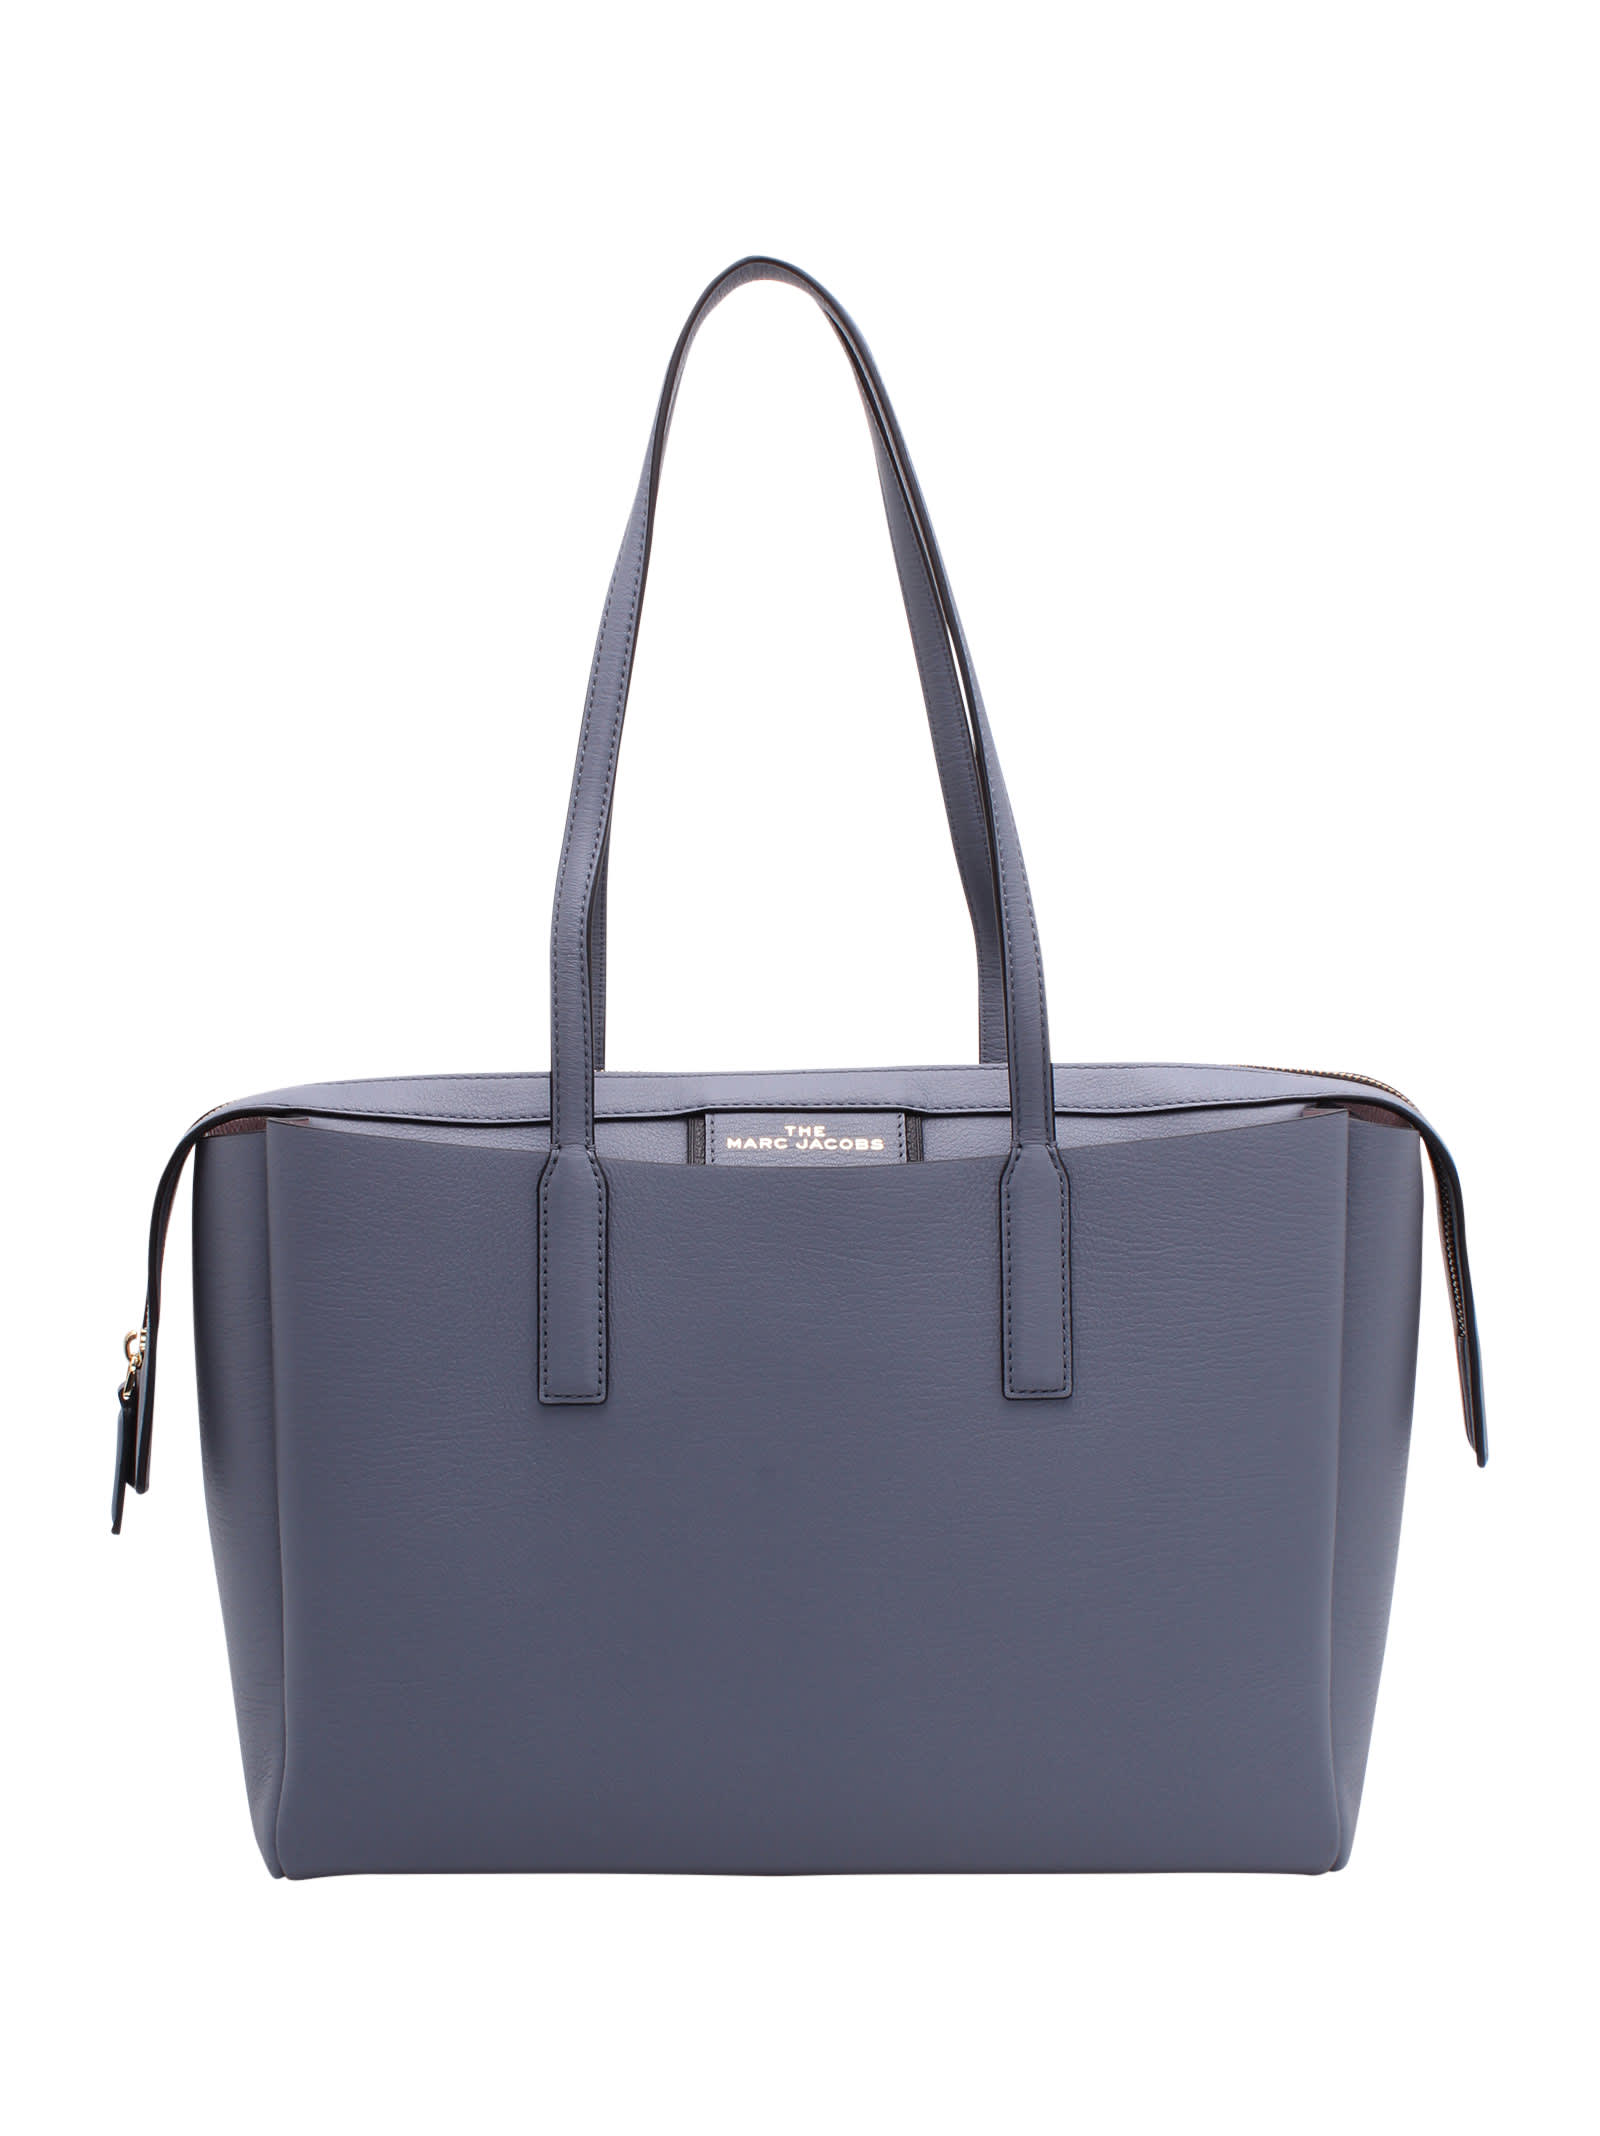 MARC JACOBS PROTEGE LEATHER TOTE BAG,11328450